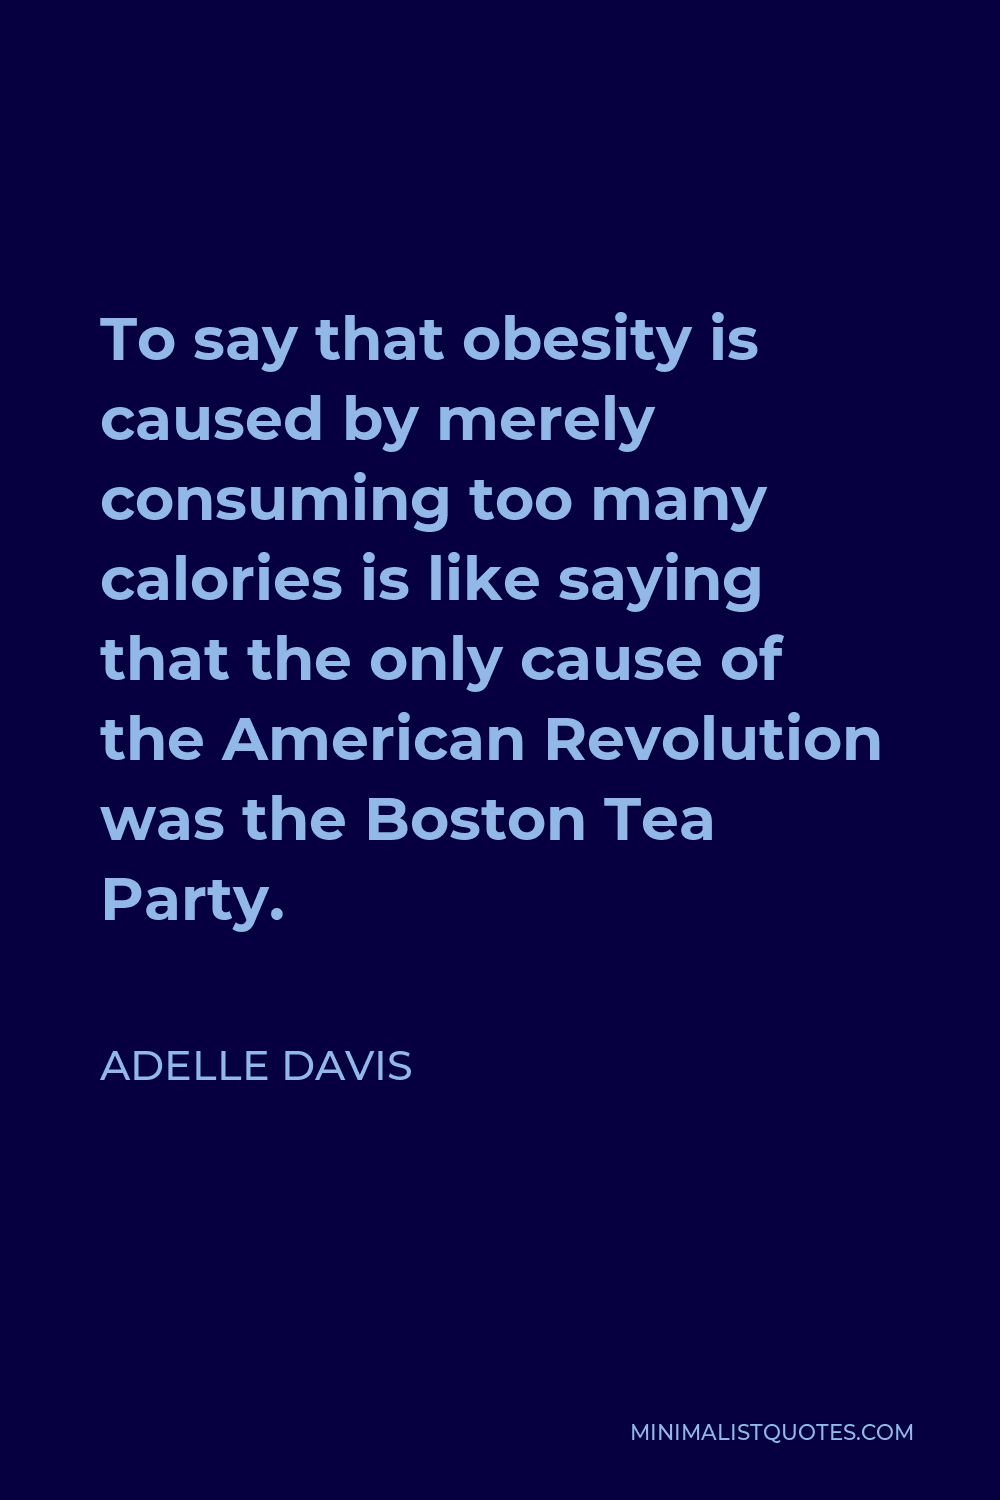 Adelle Davis Quote - To say that obesity is caused by merely consuming too many calories is like saying that the only cause of the American Revolution was the Boston Tea Party.